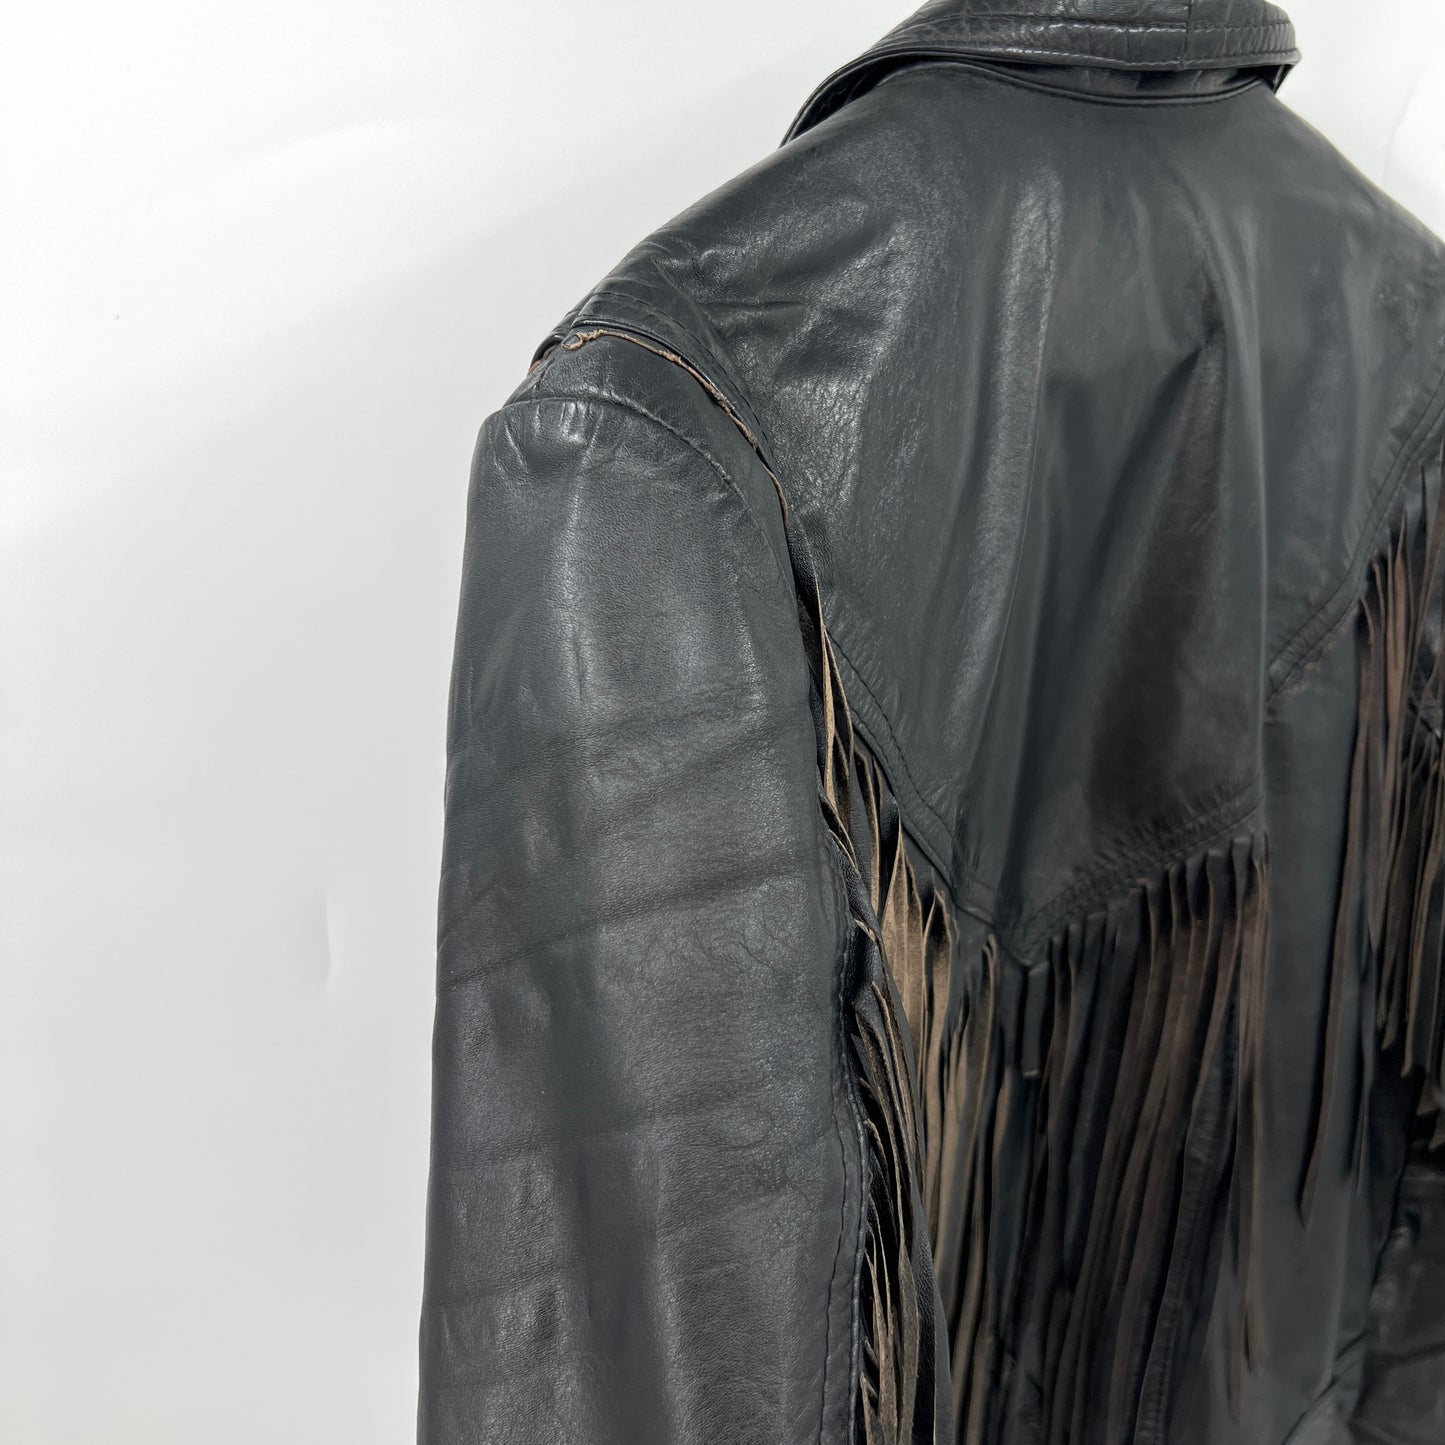 SOLD. Vintage The Leather Ranch Jacket (Fringe AS IS)